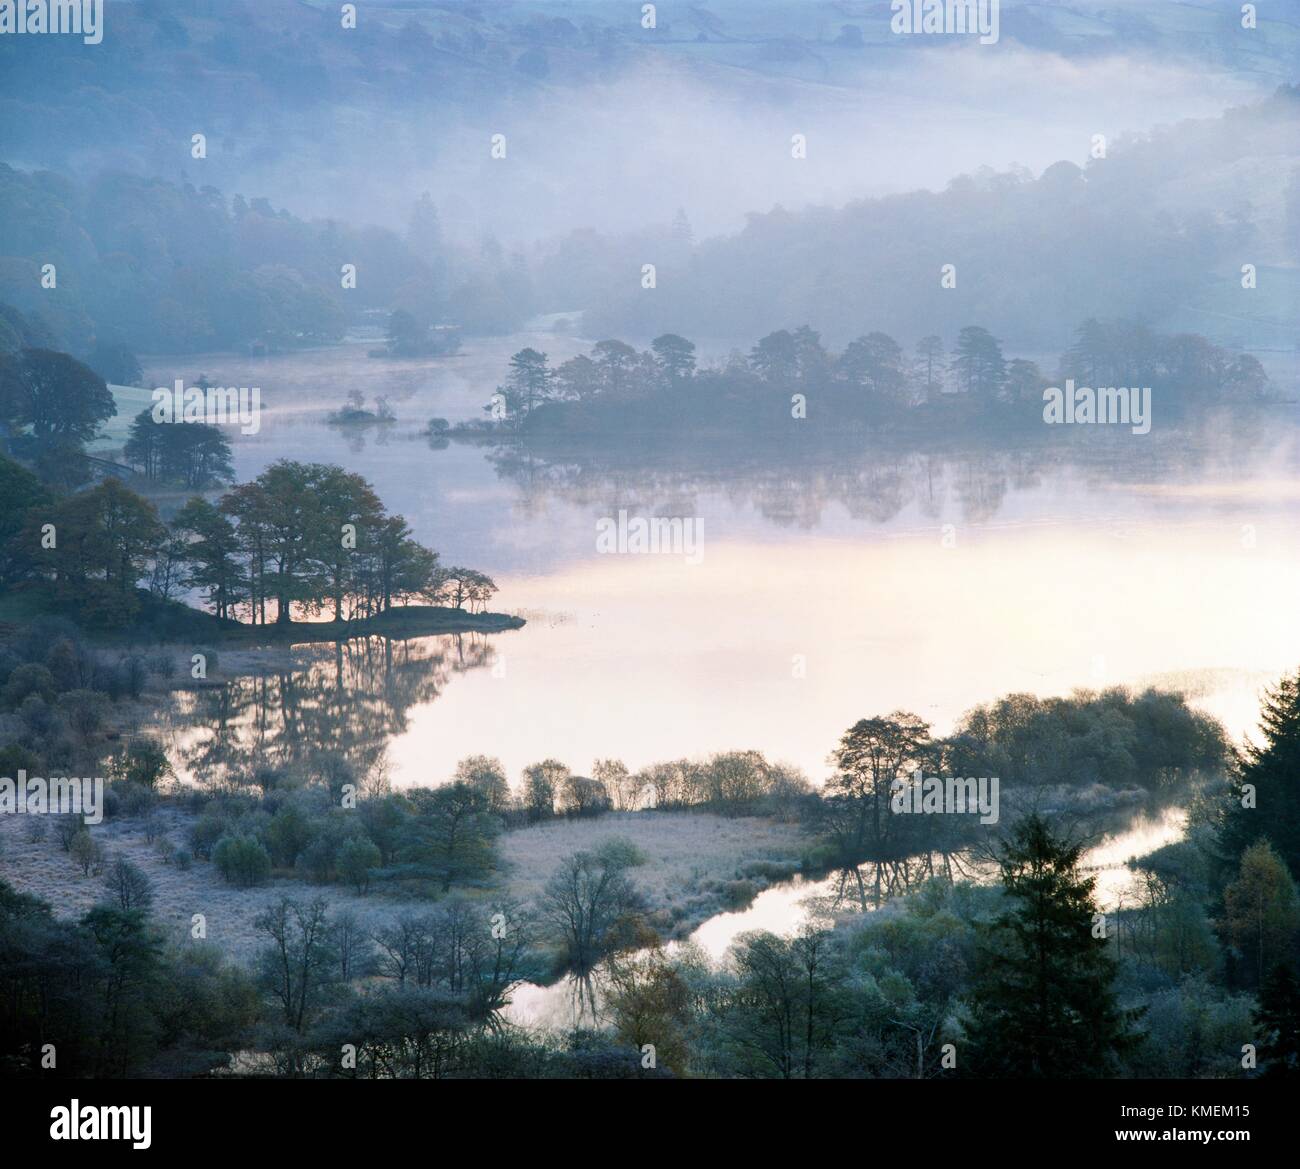 Rydal Water in the Lake District National Park near Grasmere, Ambleside and Windermere. Cumbria, England. Winter morning frost. Stock Photo